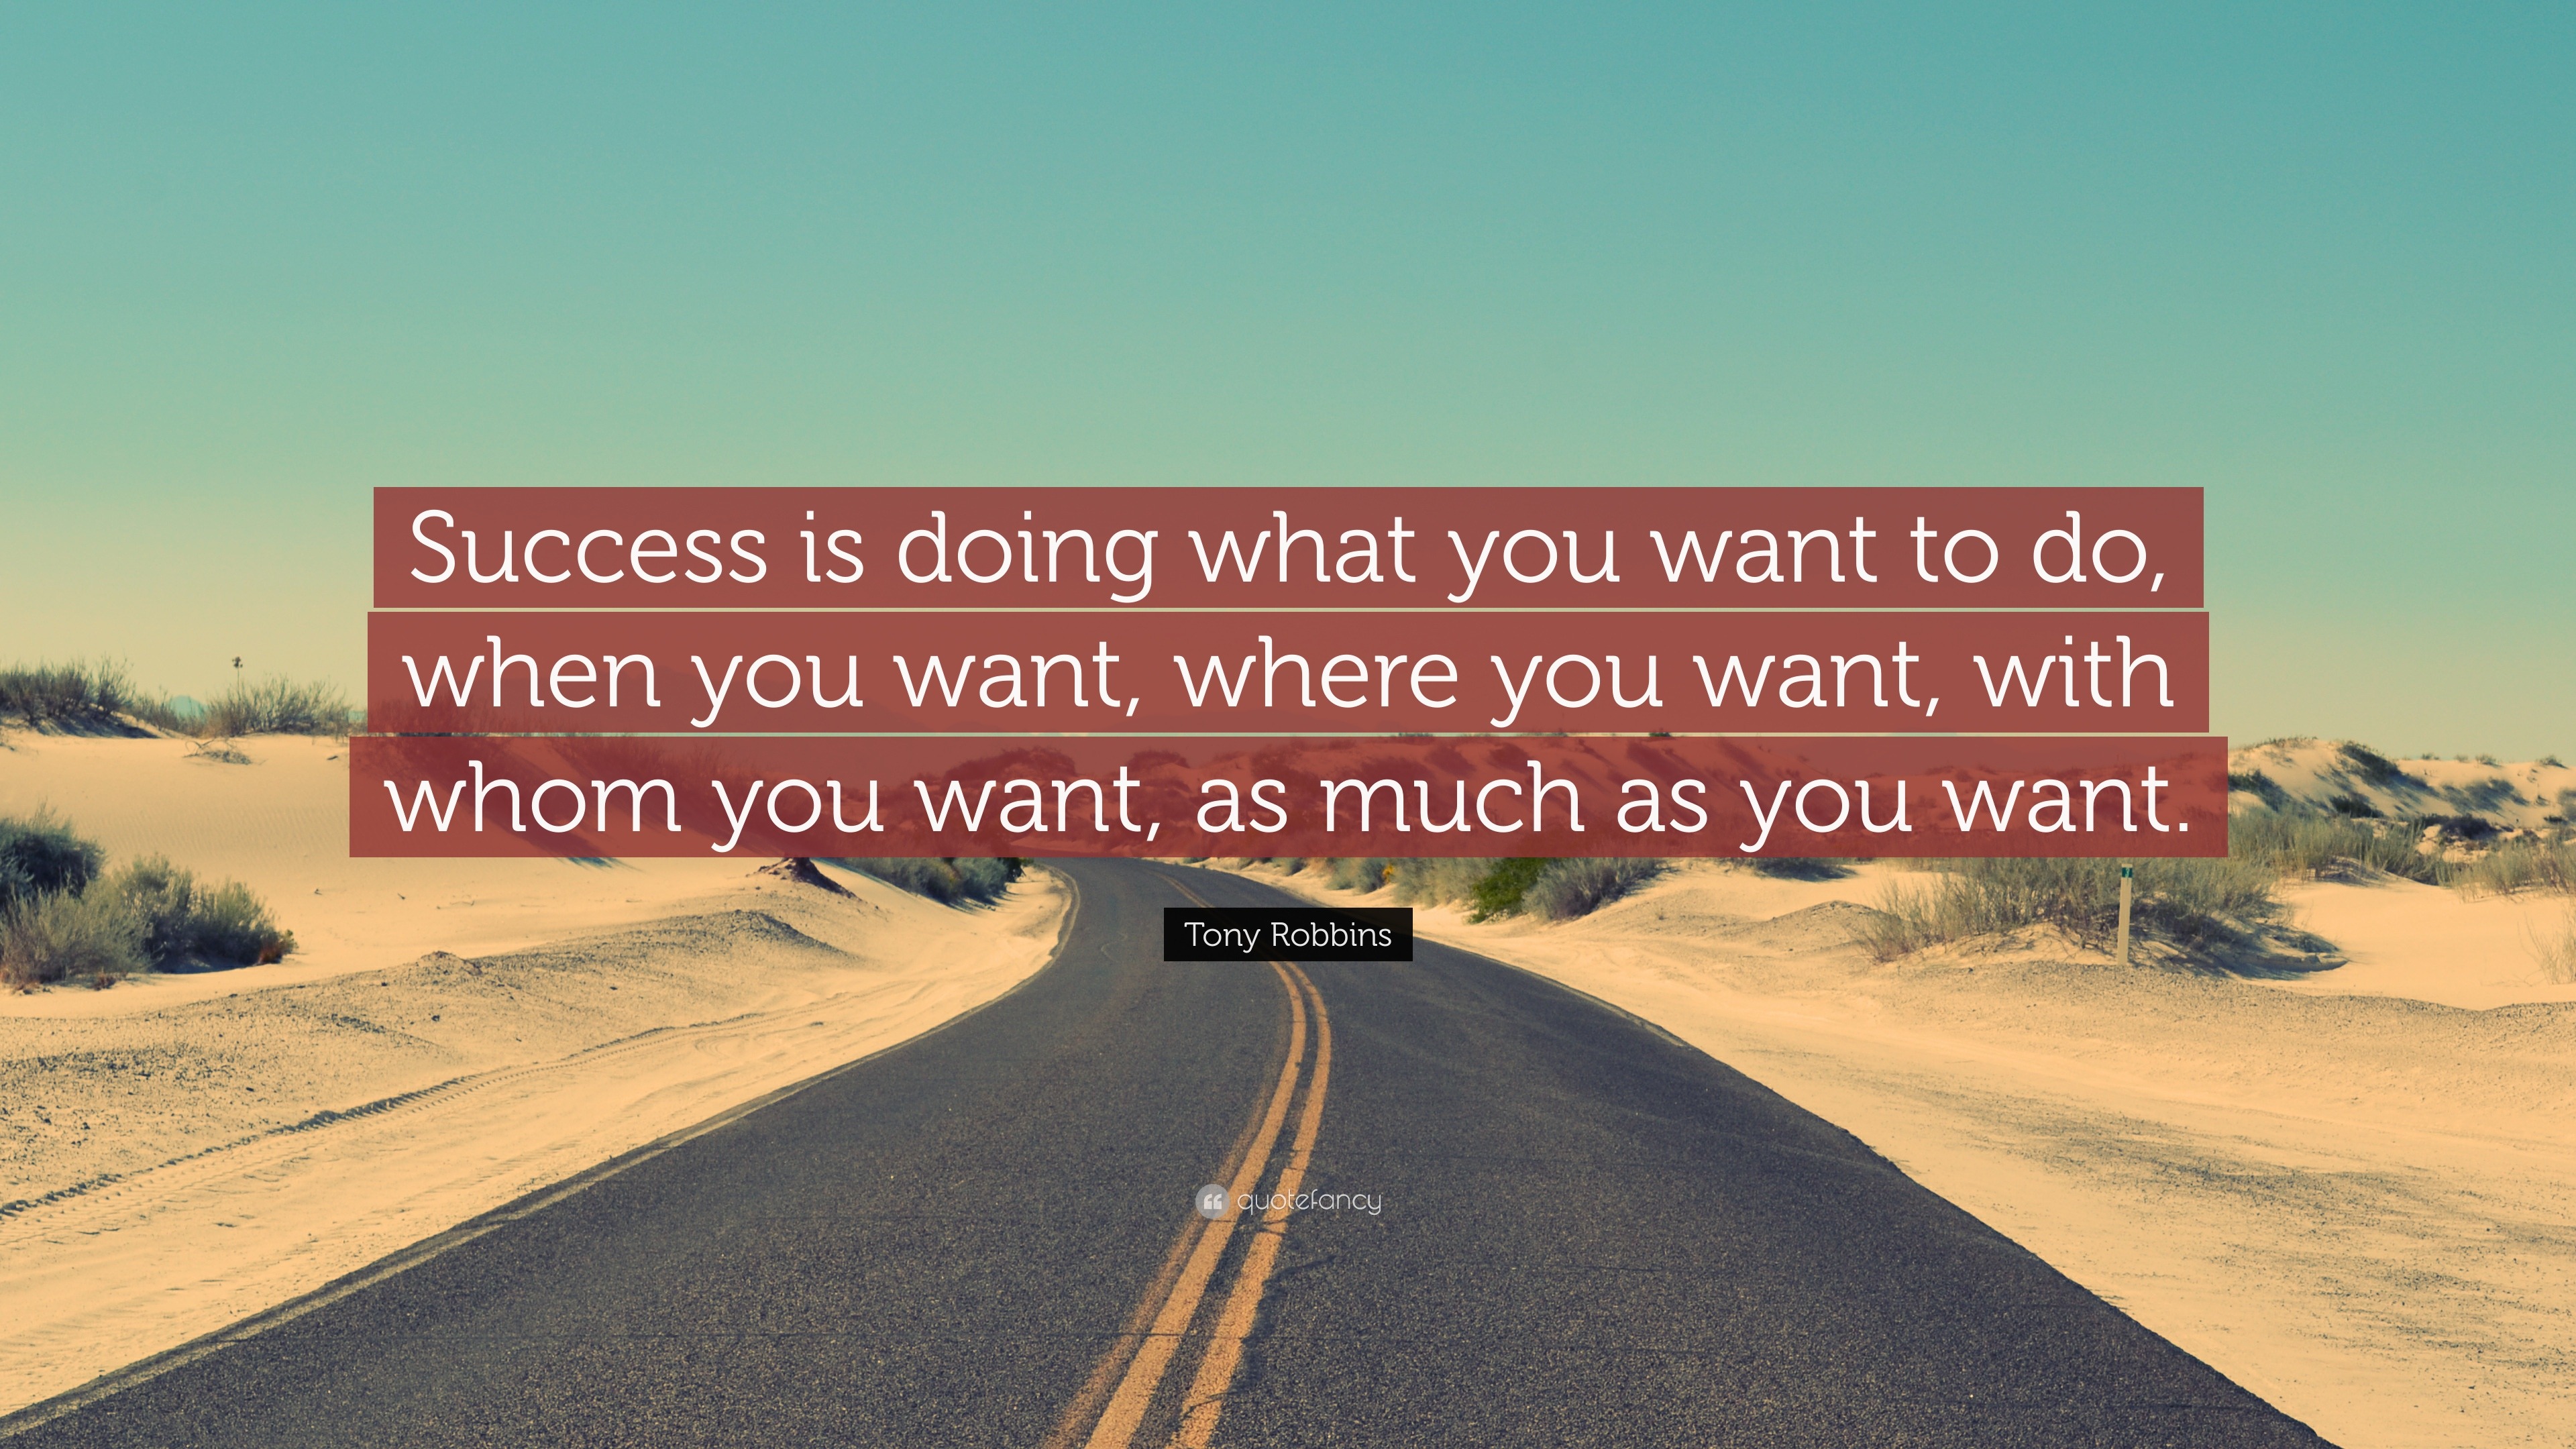 Tony Robbins Quote Success Is Doing What You Want To Do When You Want Where You